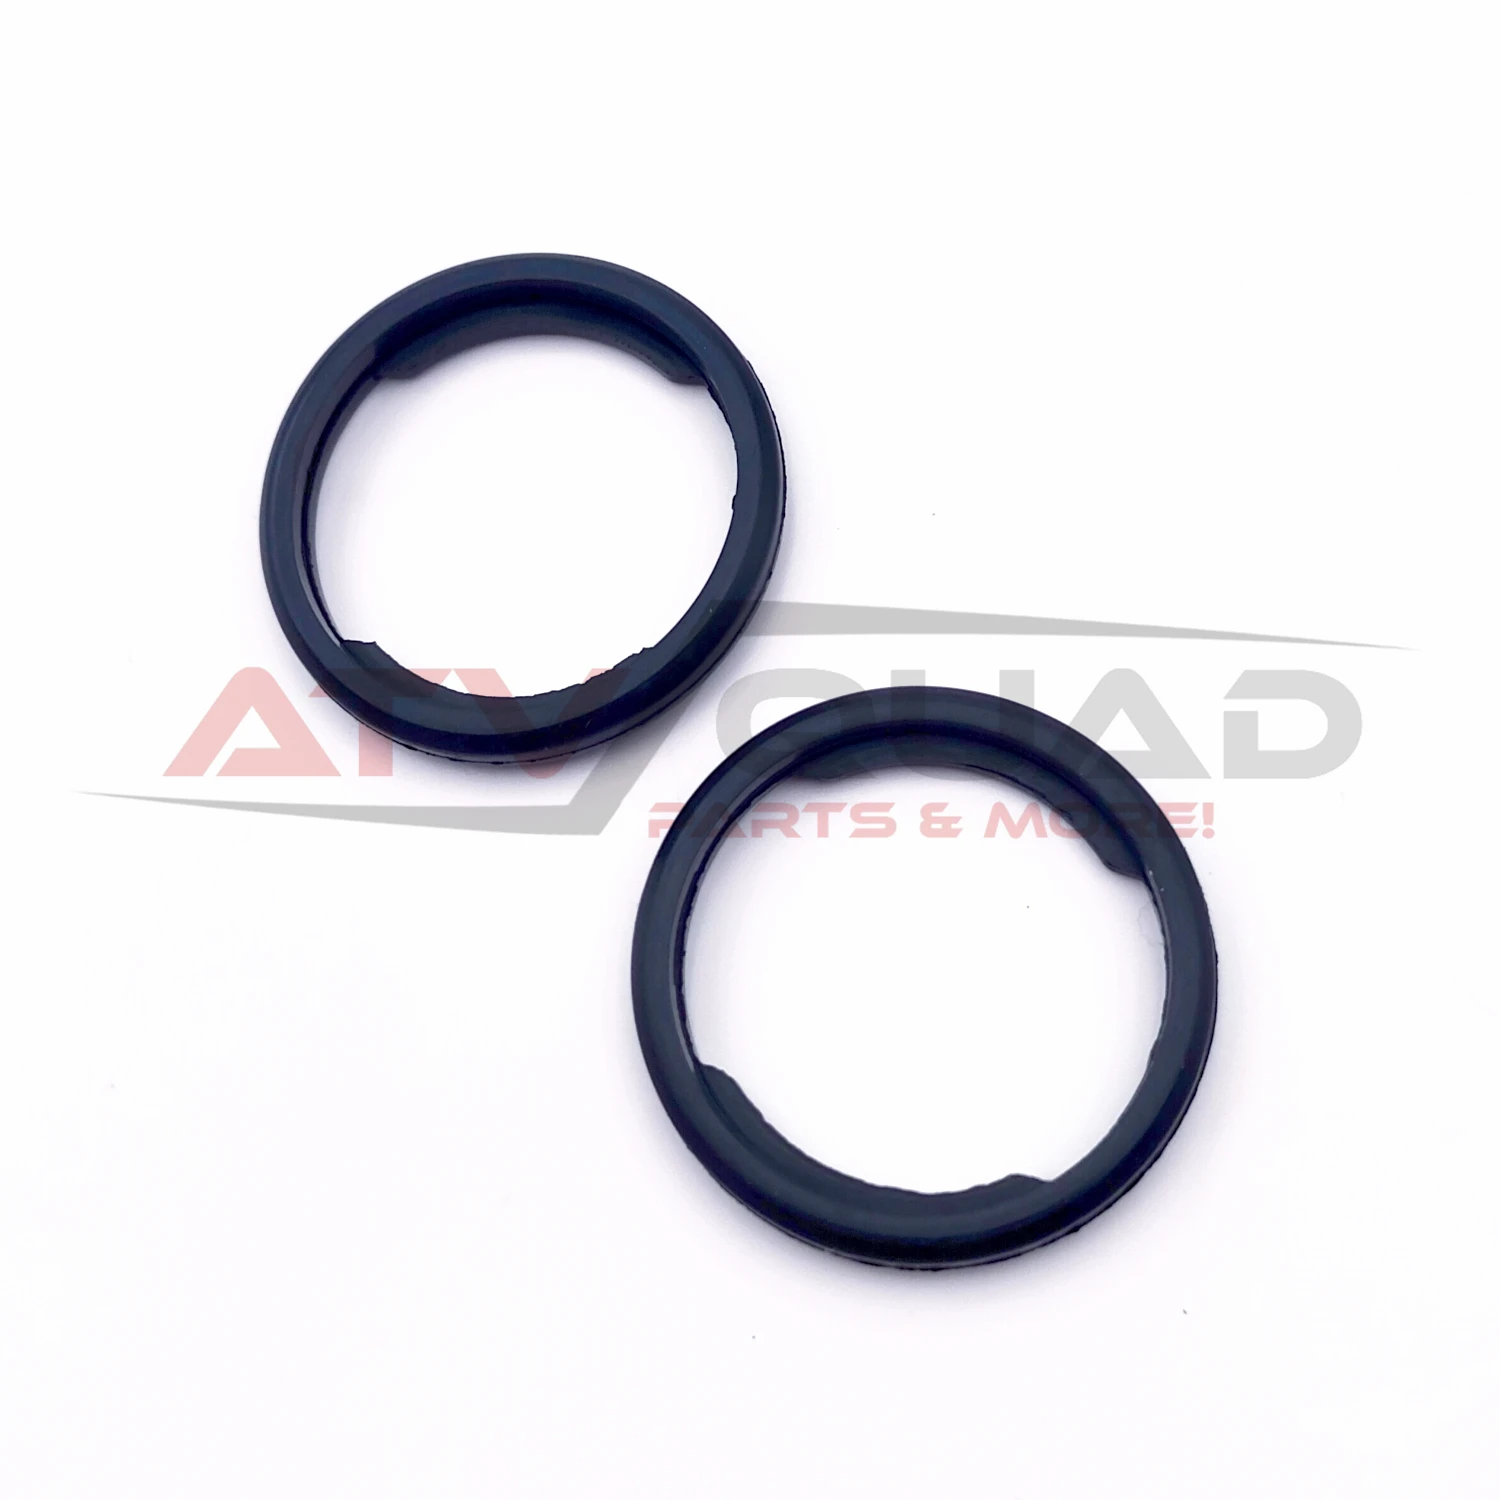 2PCS Thermostat Seal Ring for CFmoto 400 450 500S 520 550 600 Touring 625 800 800EX 800XC 850 X8H.O. 950 950EX 1000 0010-022802 2pcs yxd odu 125 109 18 125x109x18 blue ring cylinder gasket wiper dustproof pneumatic piston rod symmetric oil seal